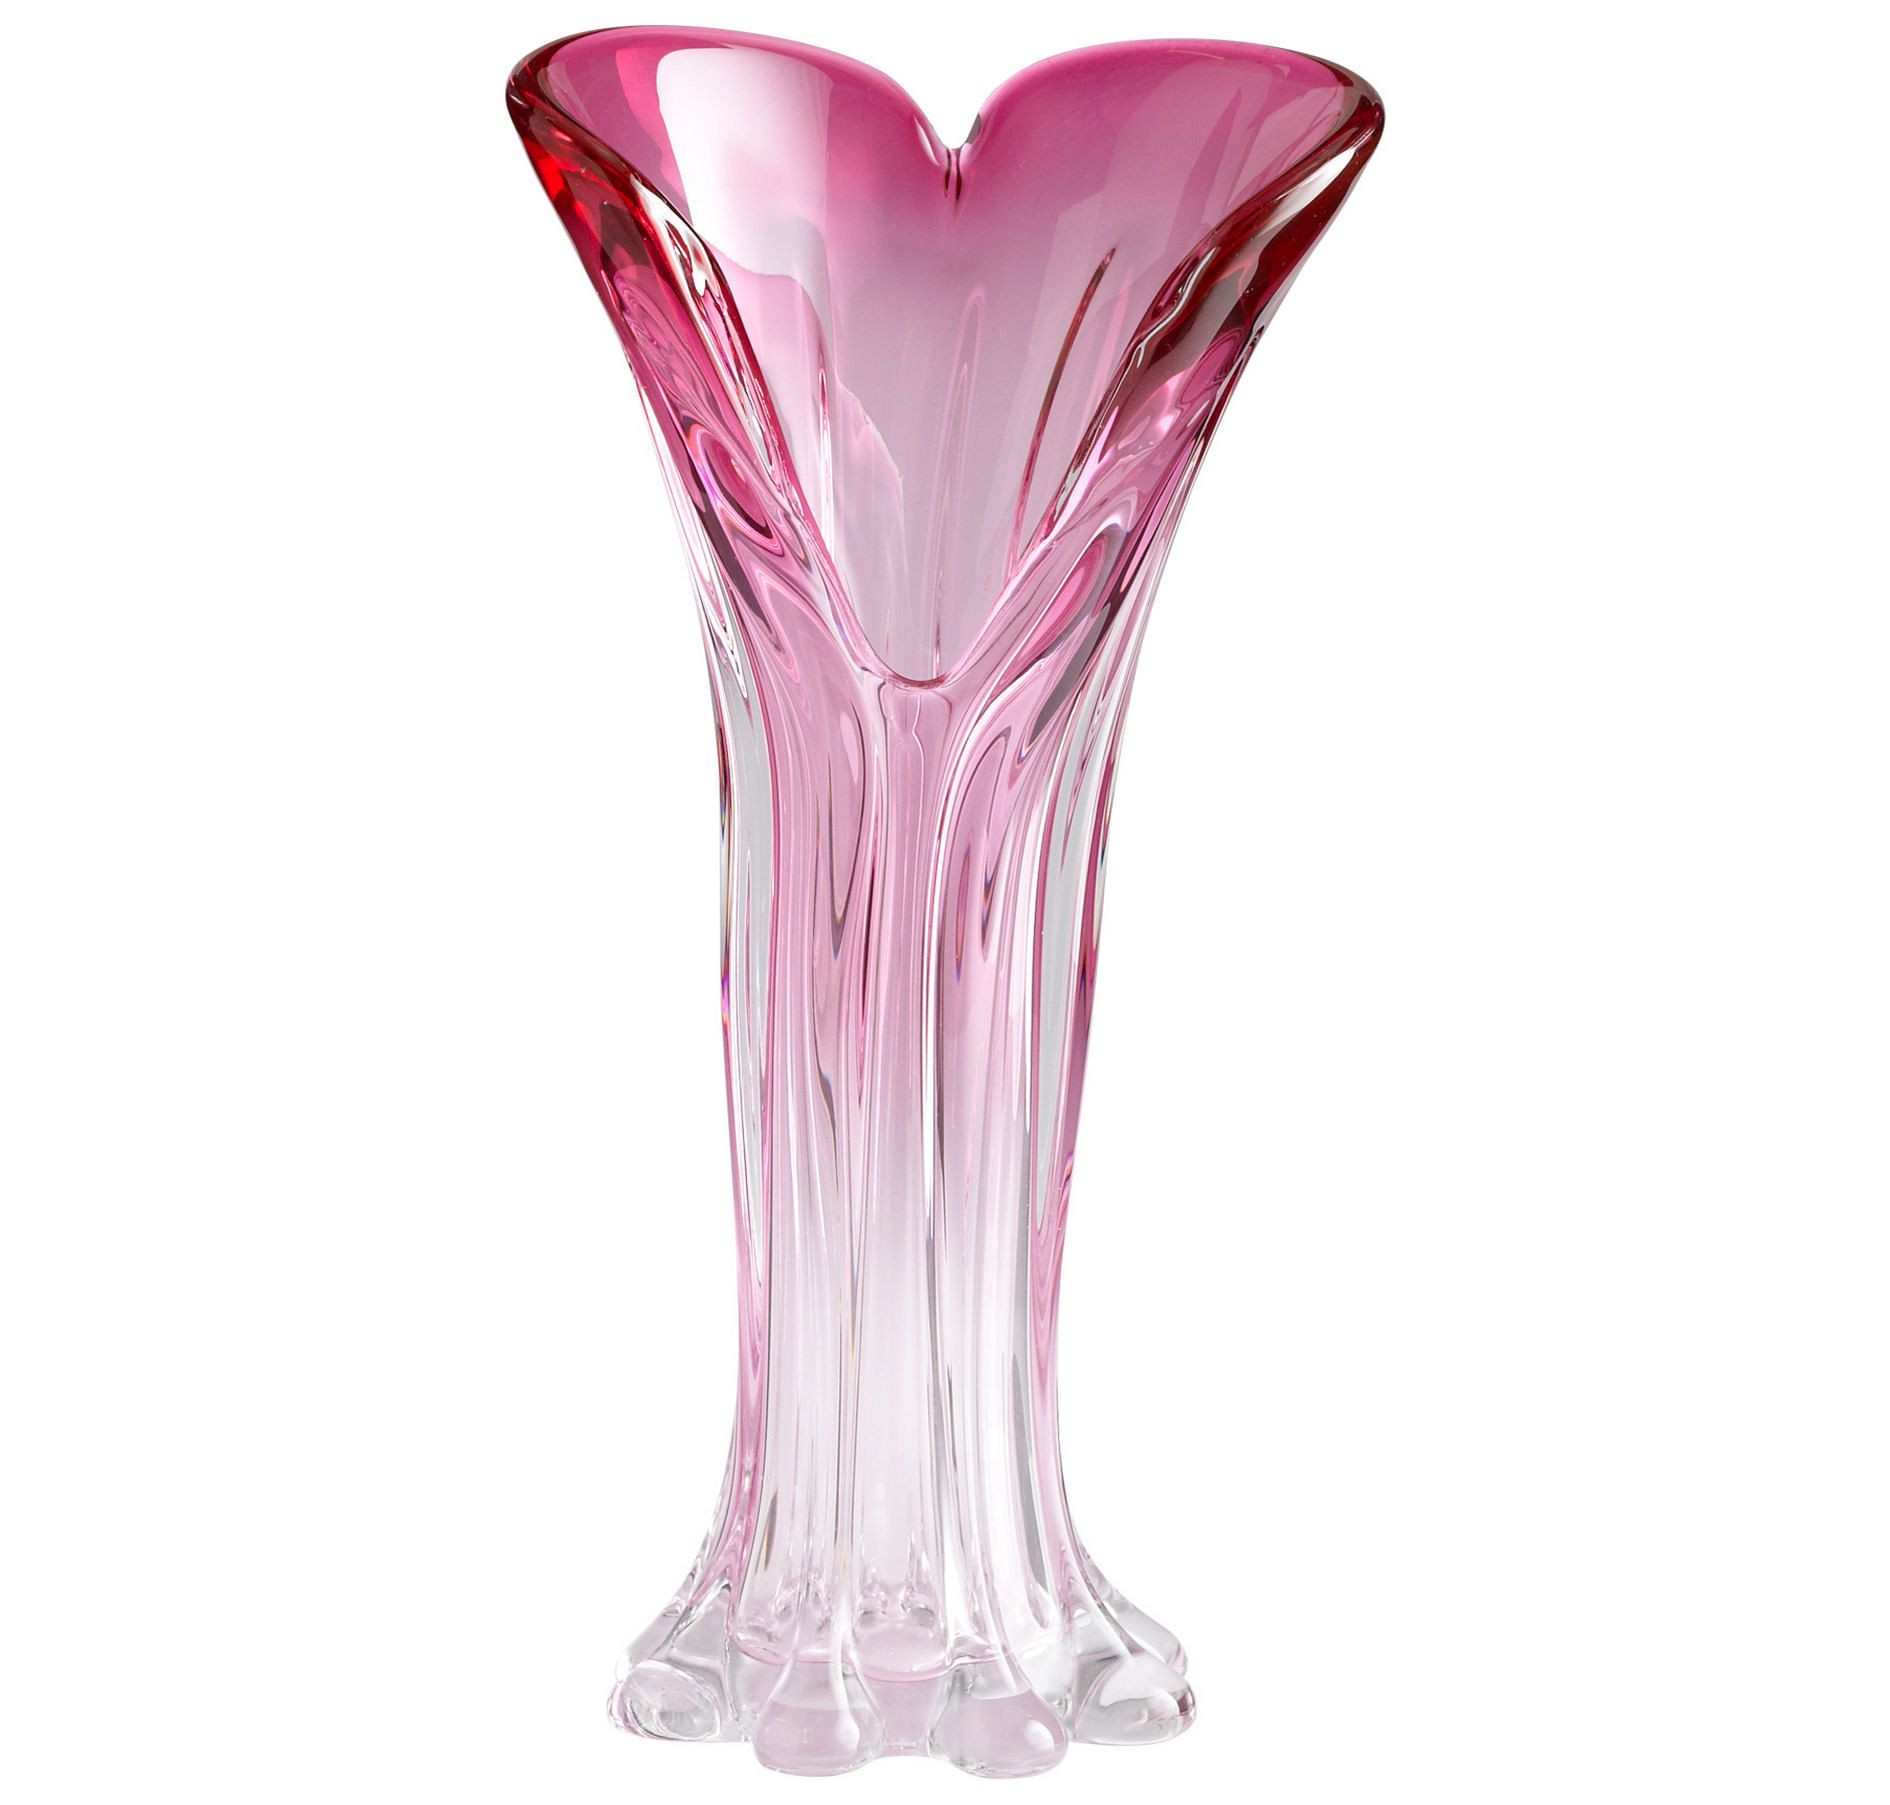 mercury glass footed vase of cyan design 05388 large cuore vase in pink finish in home decor pertaining to cyan design 05388 large cuore vase in pink finish in home decor vases urns